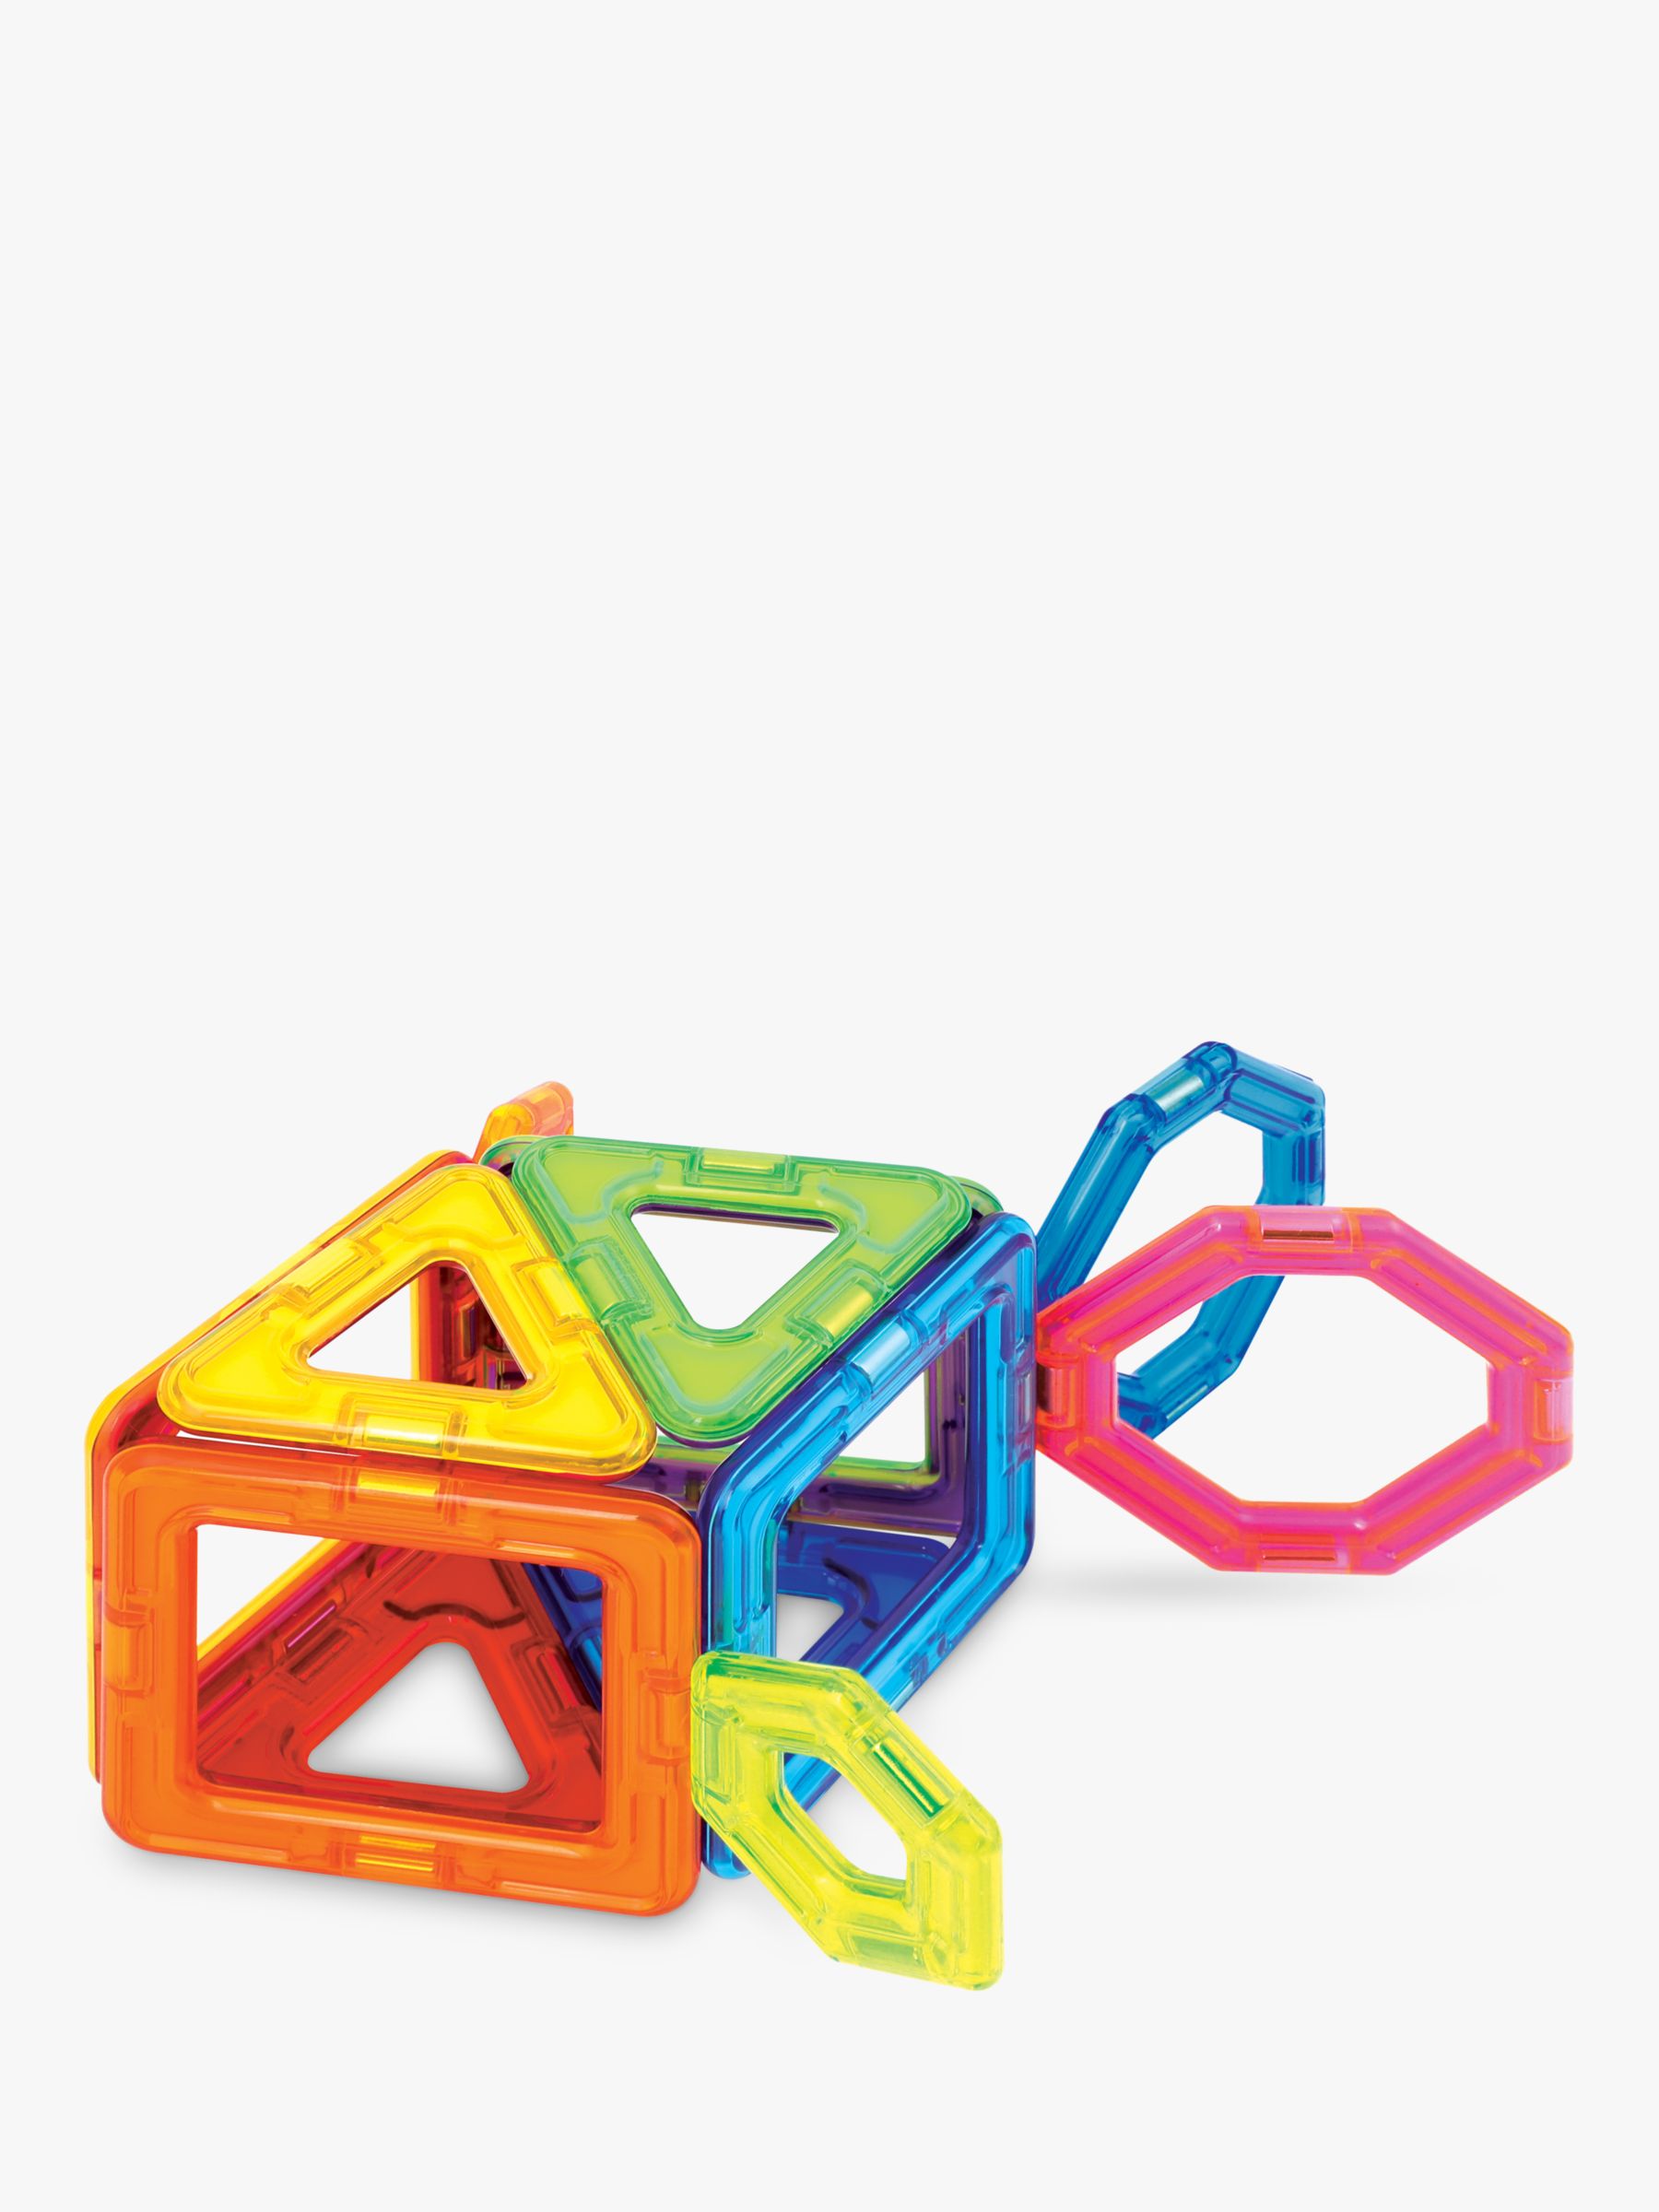 Lot of 15 Magformers Magnetic Building Hexagon, Triangles